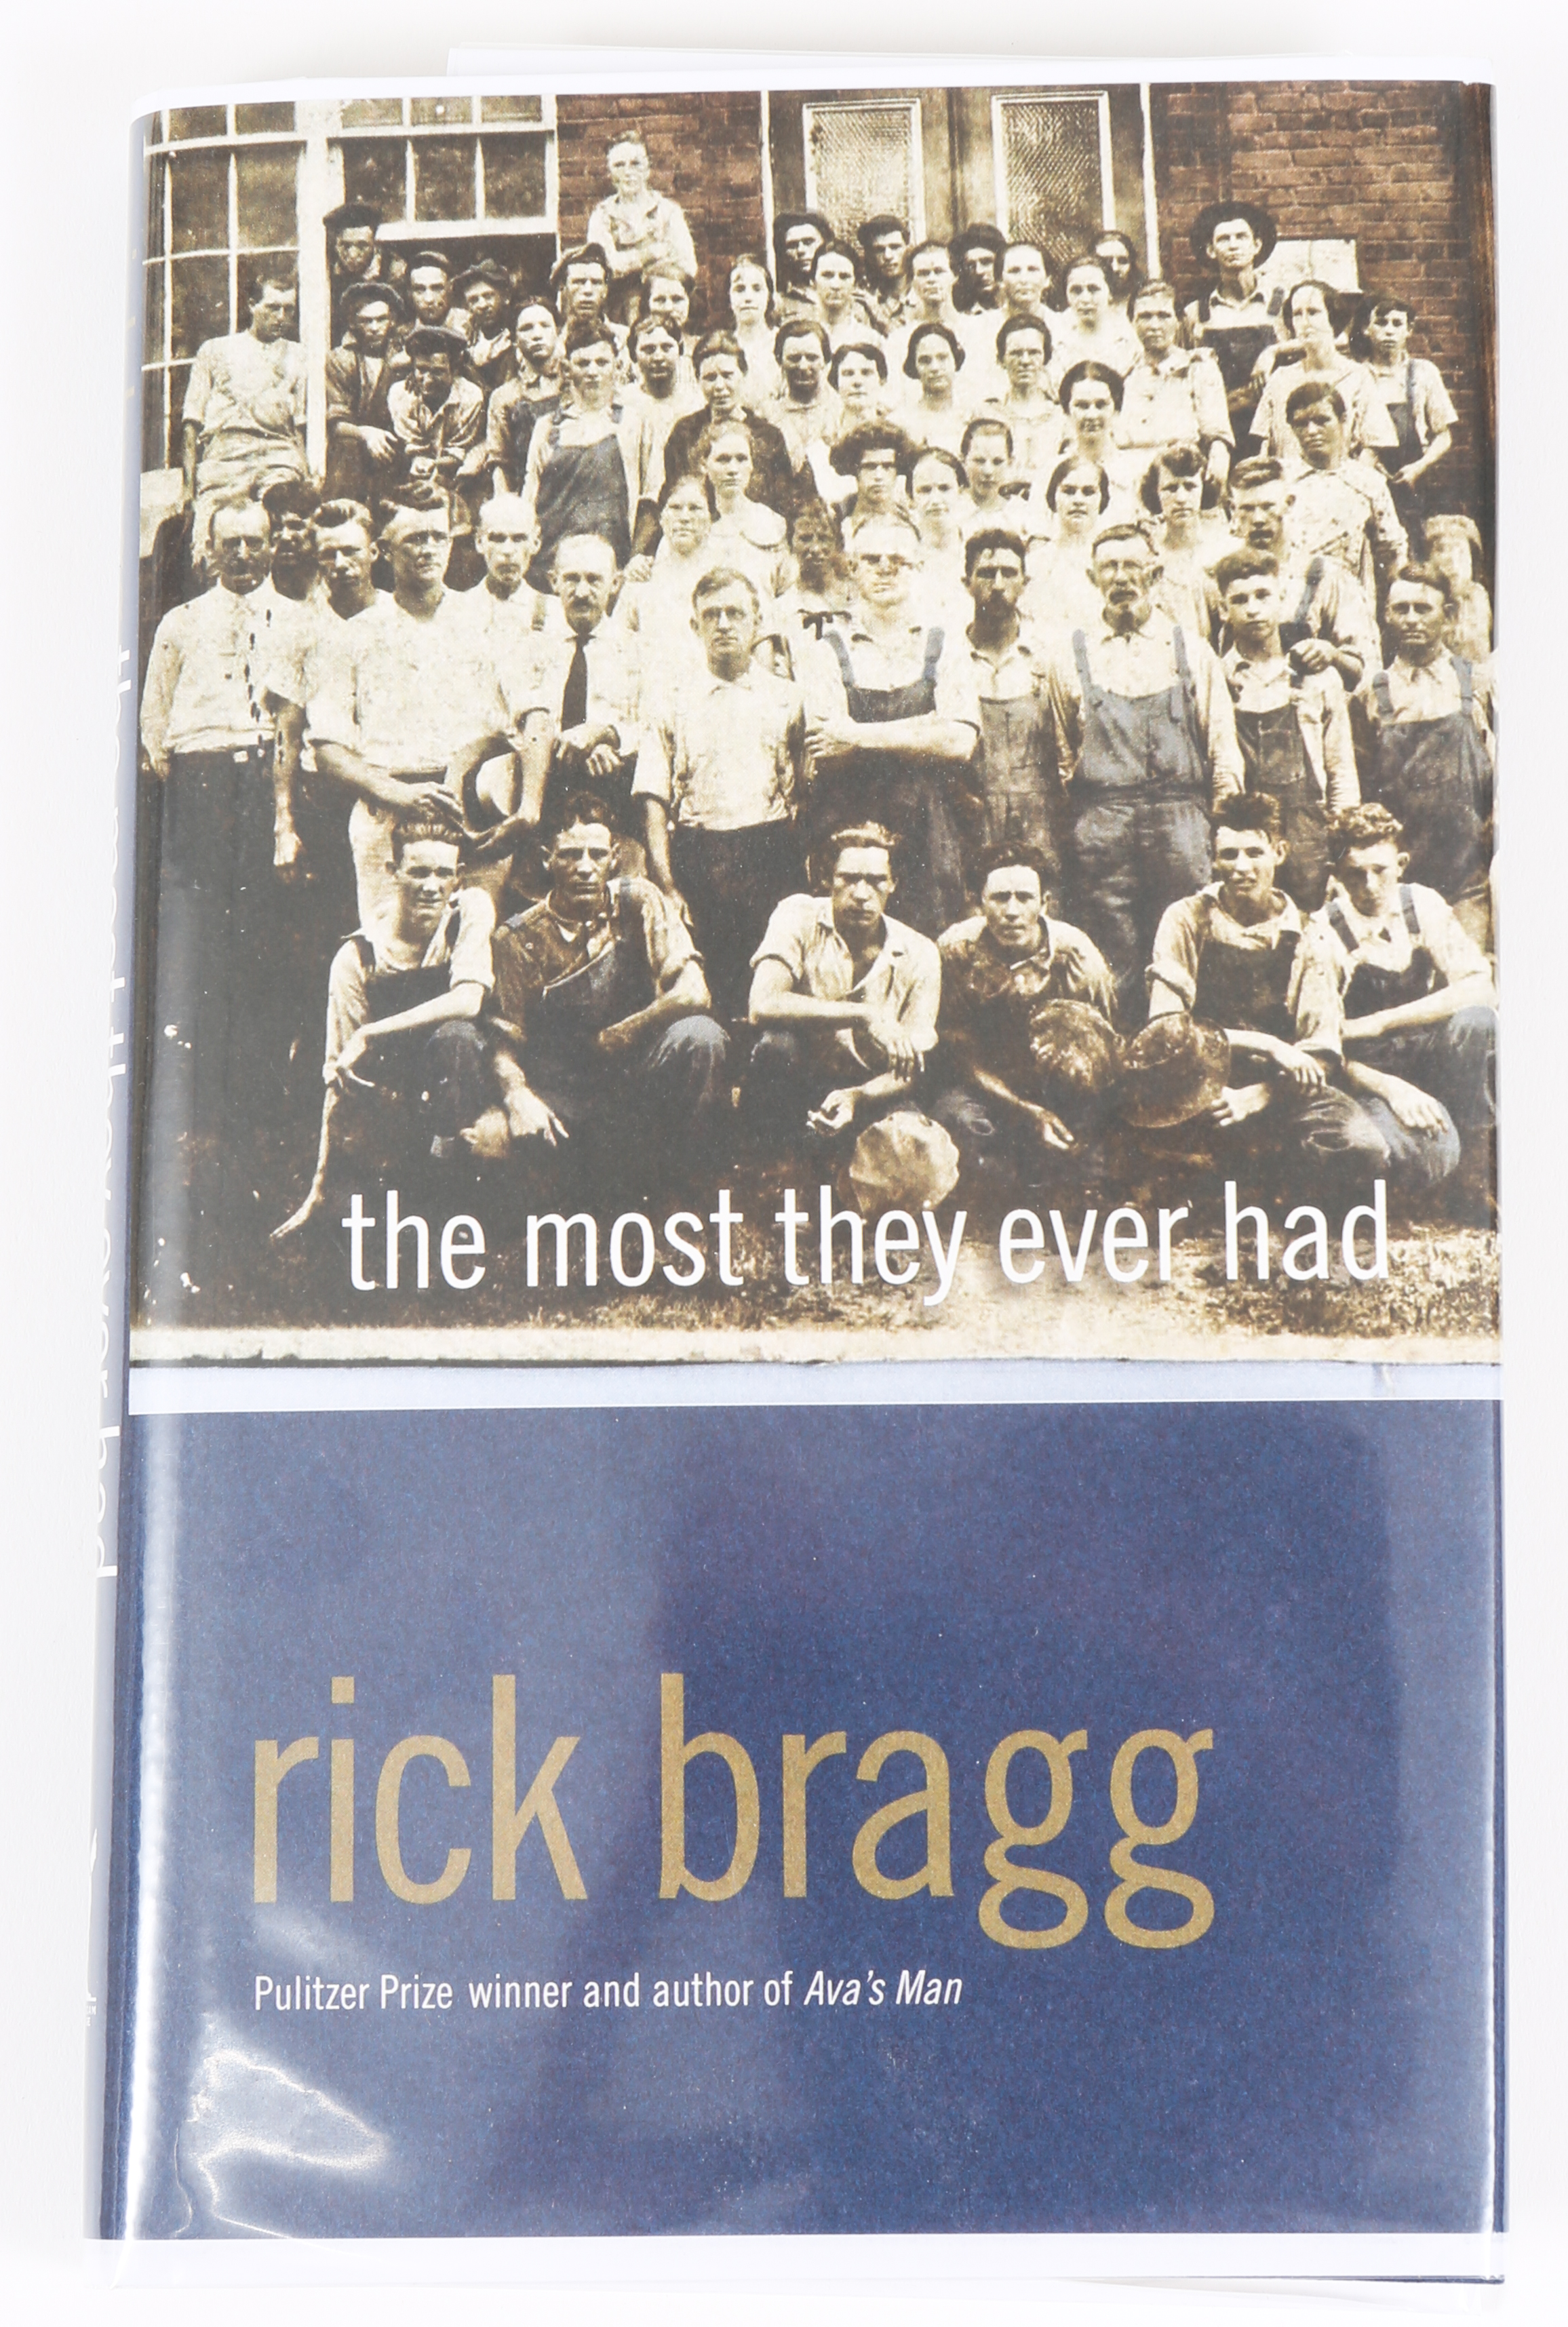 The Best Cook in the World by Rick Bragg